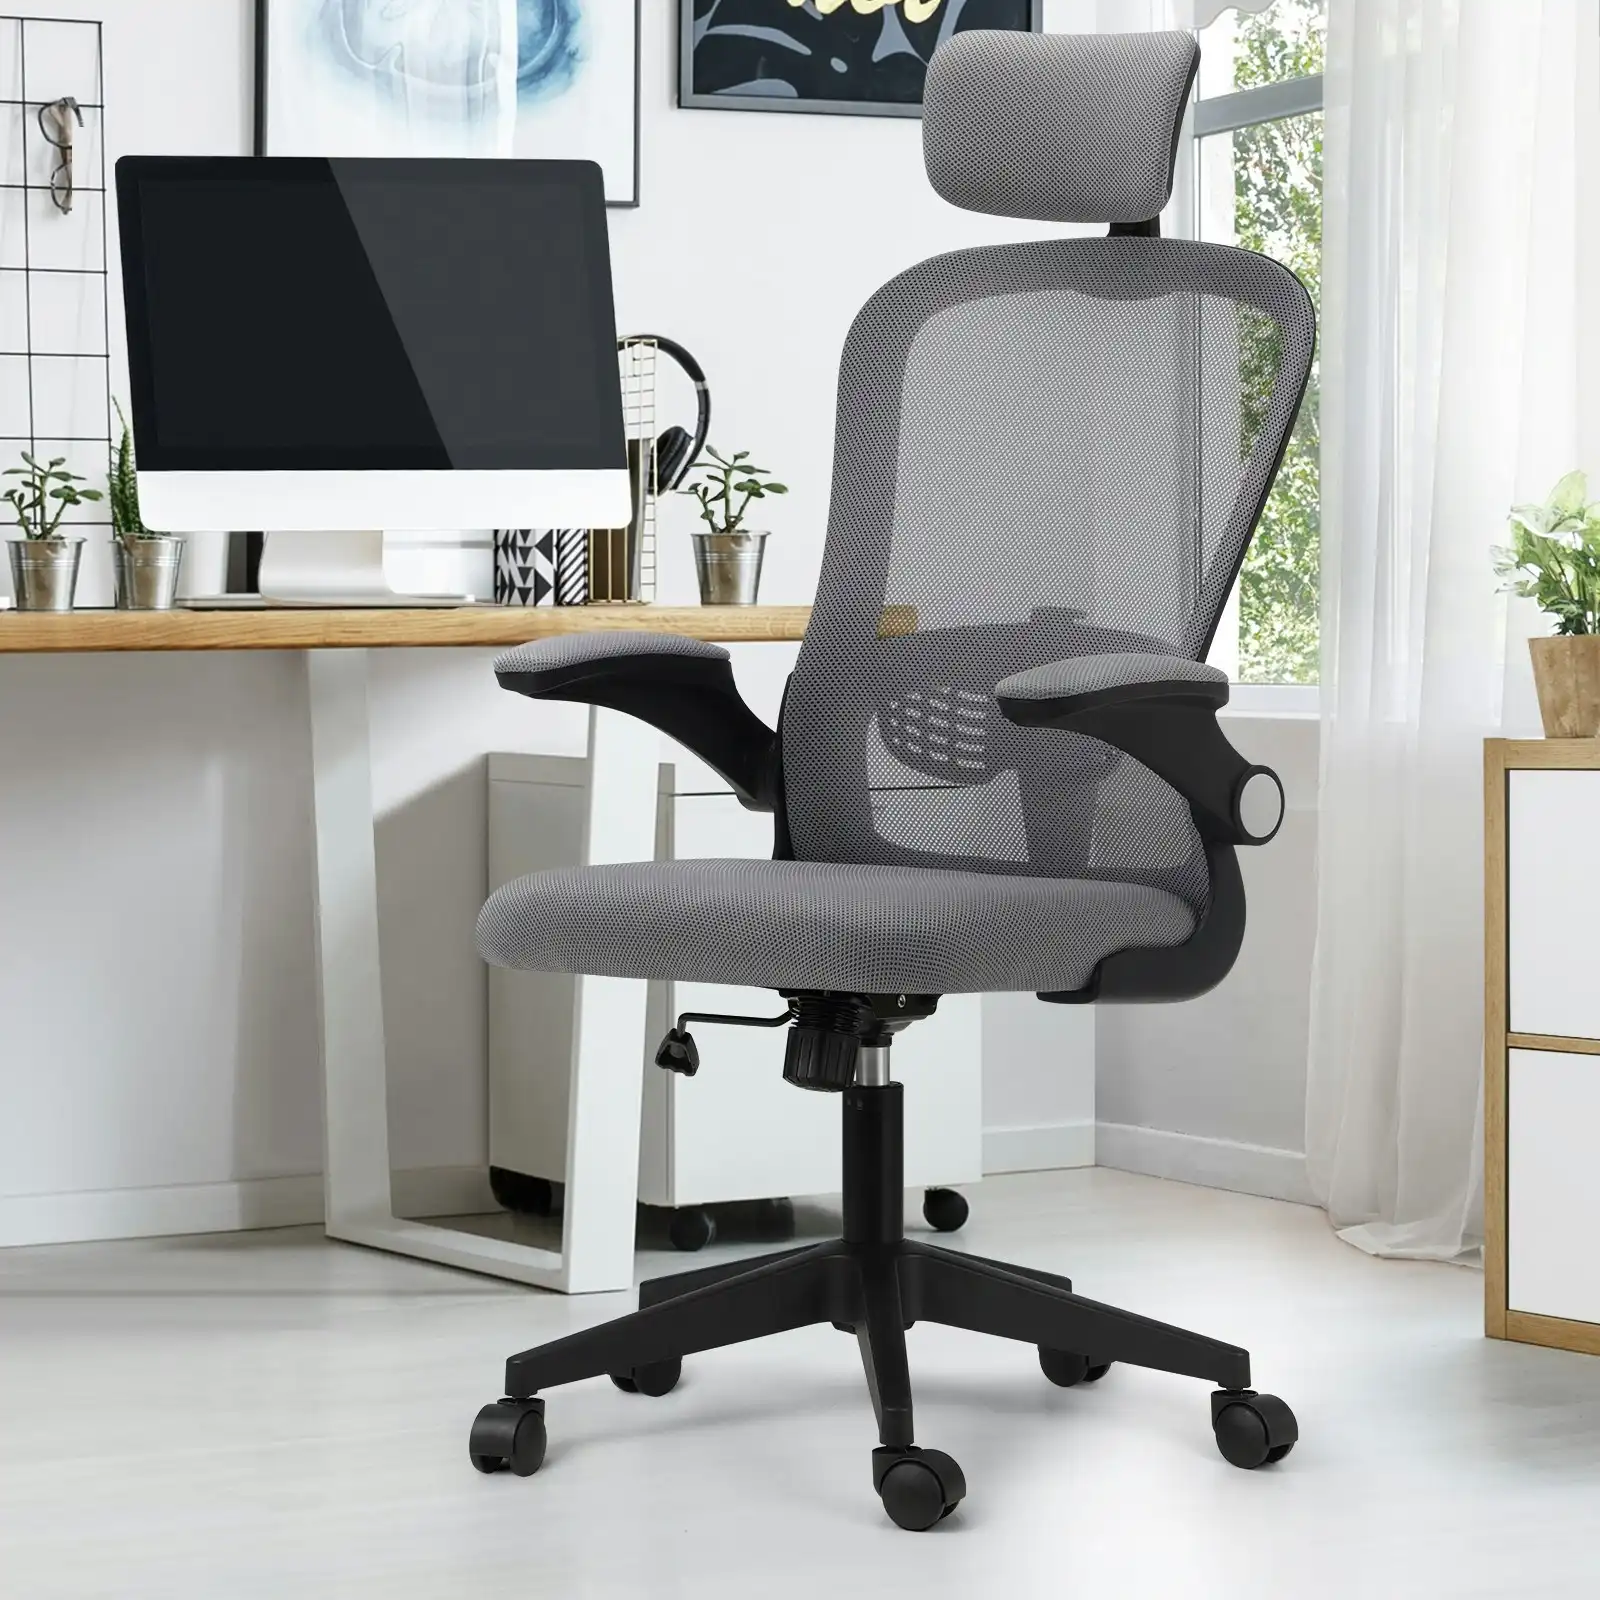 Oikiture Mesh Office Chair Executive Gaming Seat Racing Computer BLACK&GREY